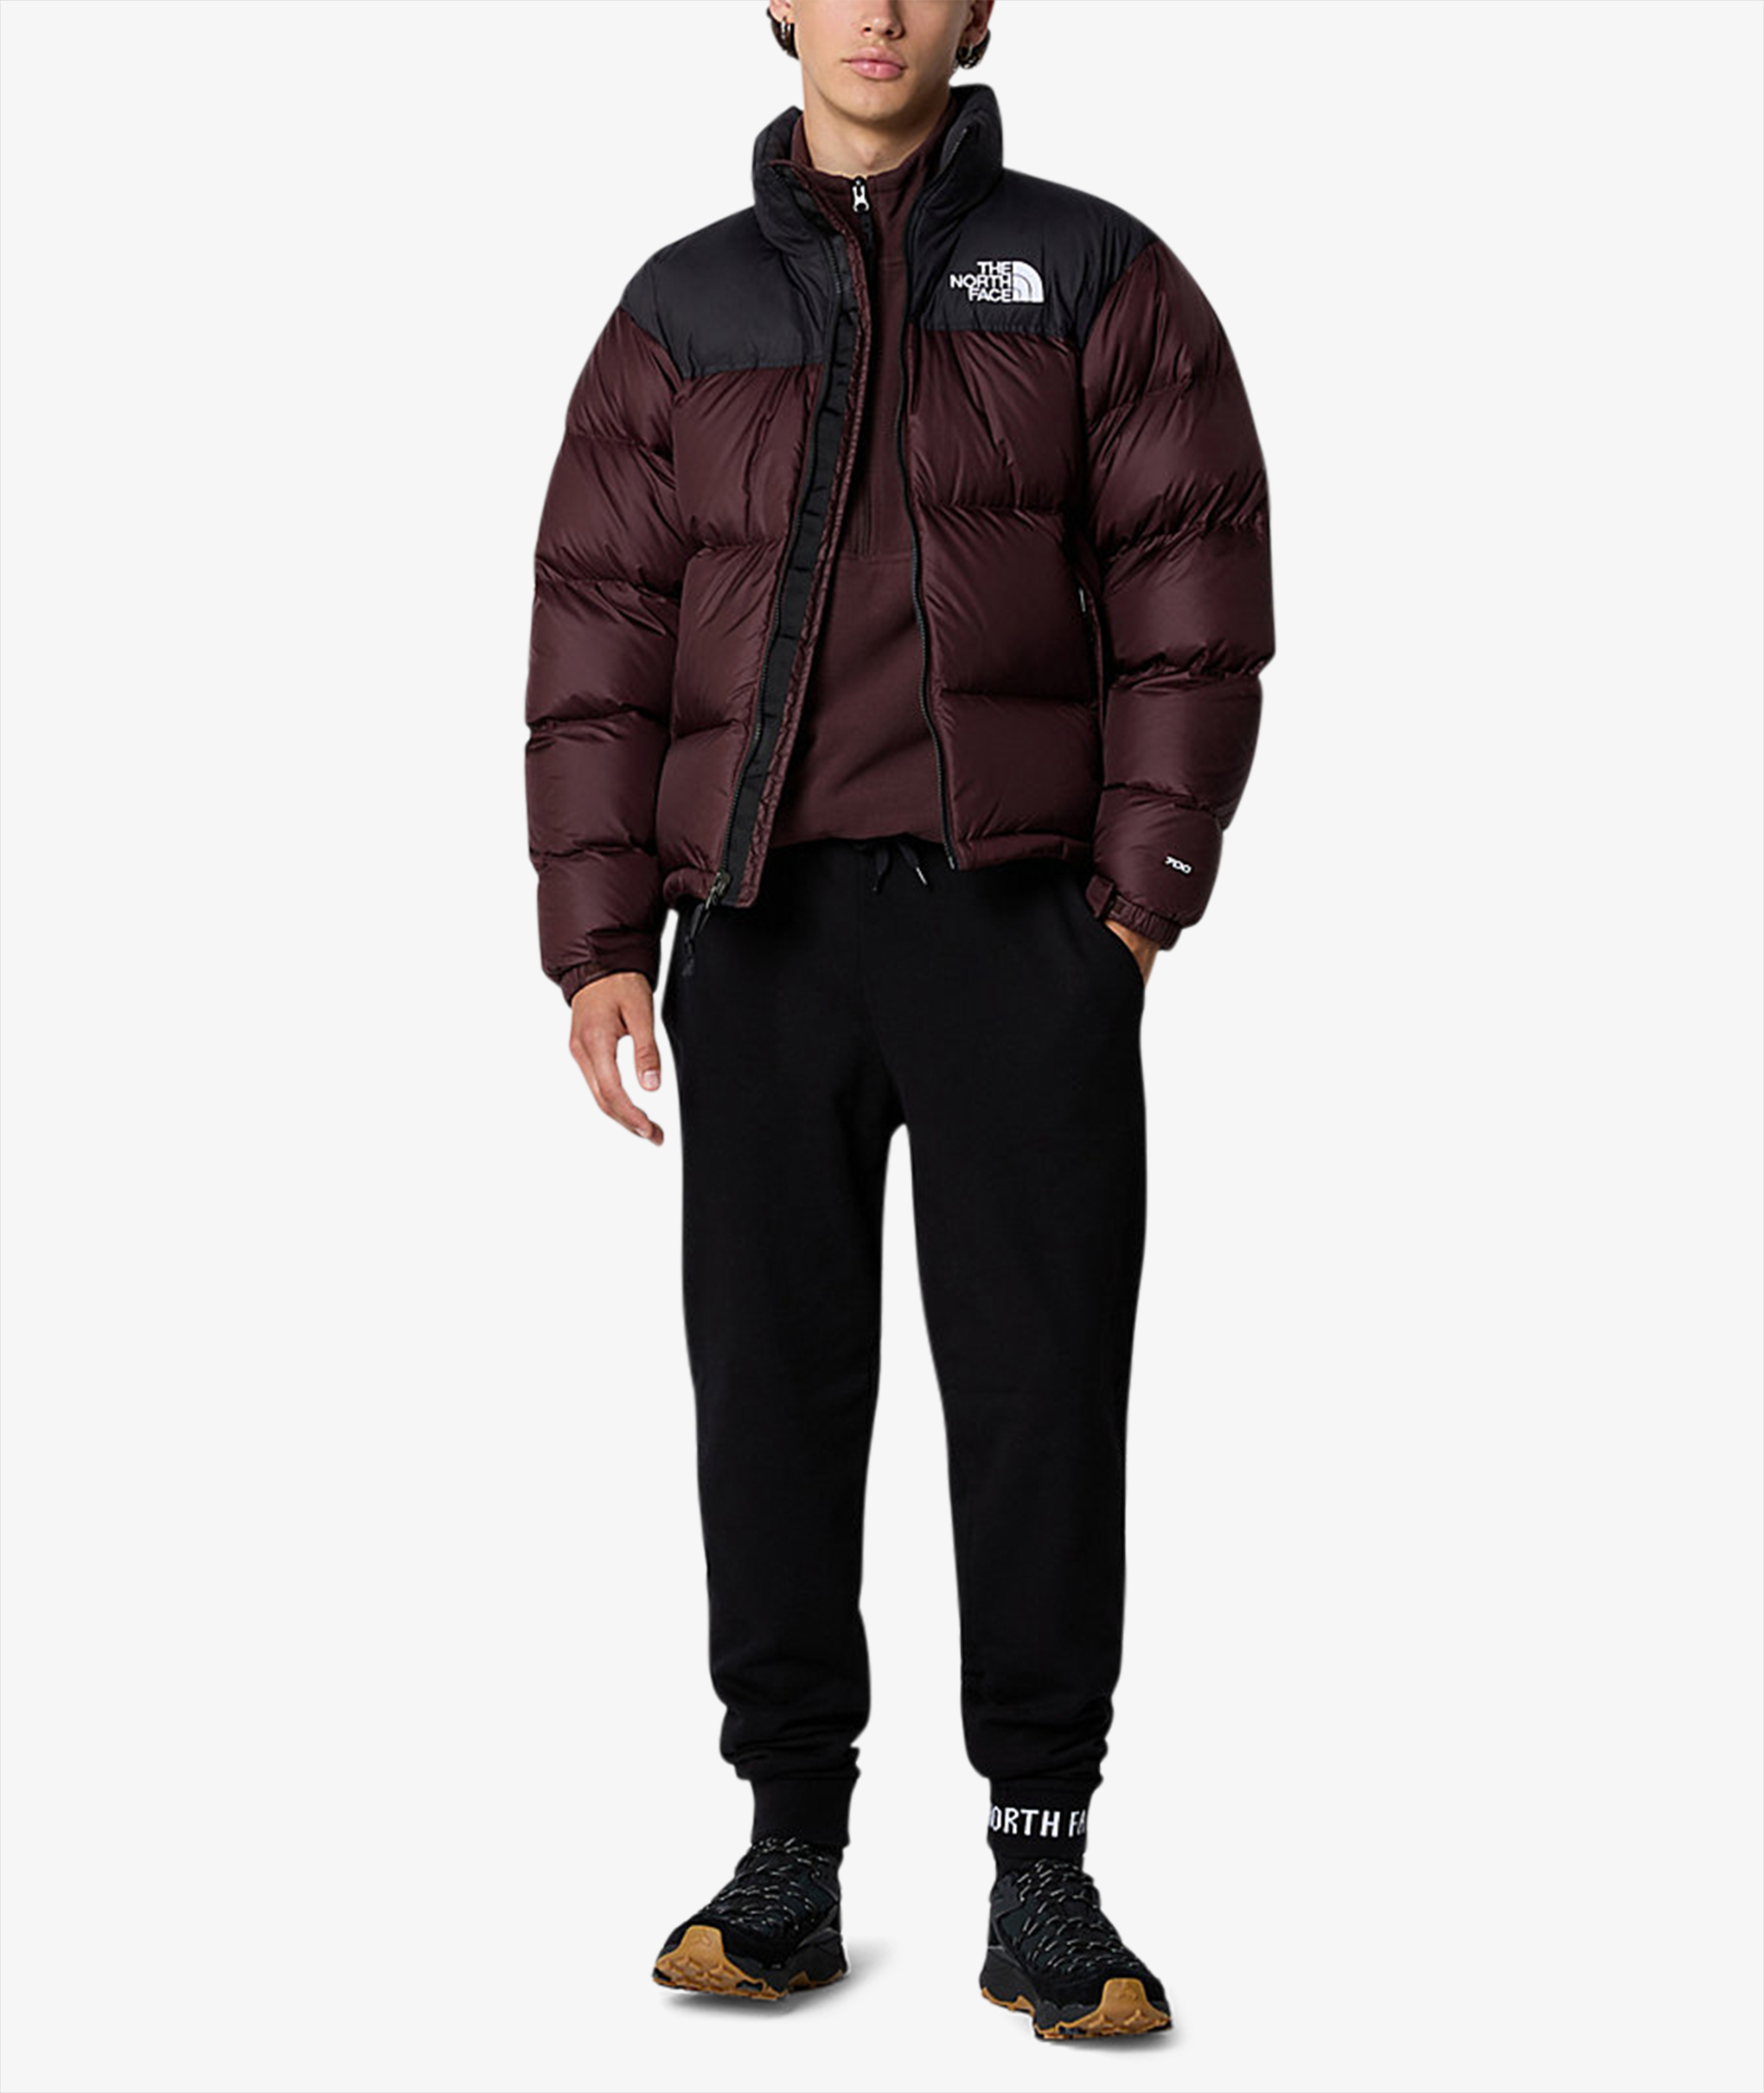 Norse Store | Shipping Worldwide - The North Face M 96 RETRO NUPTSE JKT ...